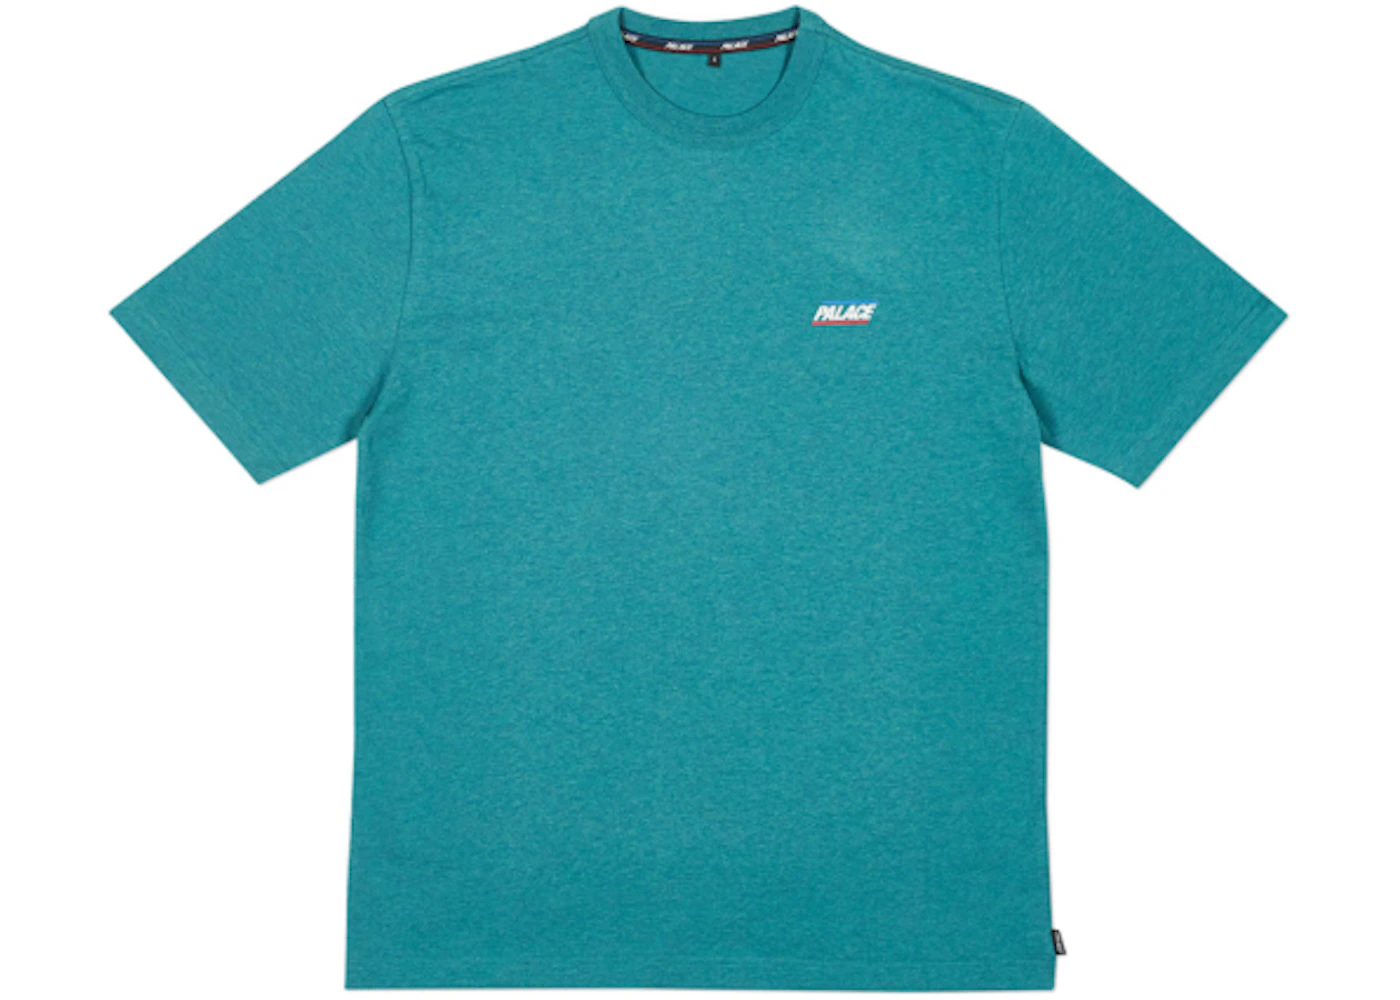 Palace Basically A T-Shirt (FW18) Forest Green Marl - FW18 - GB